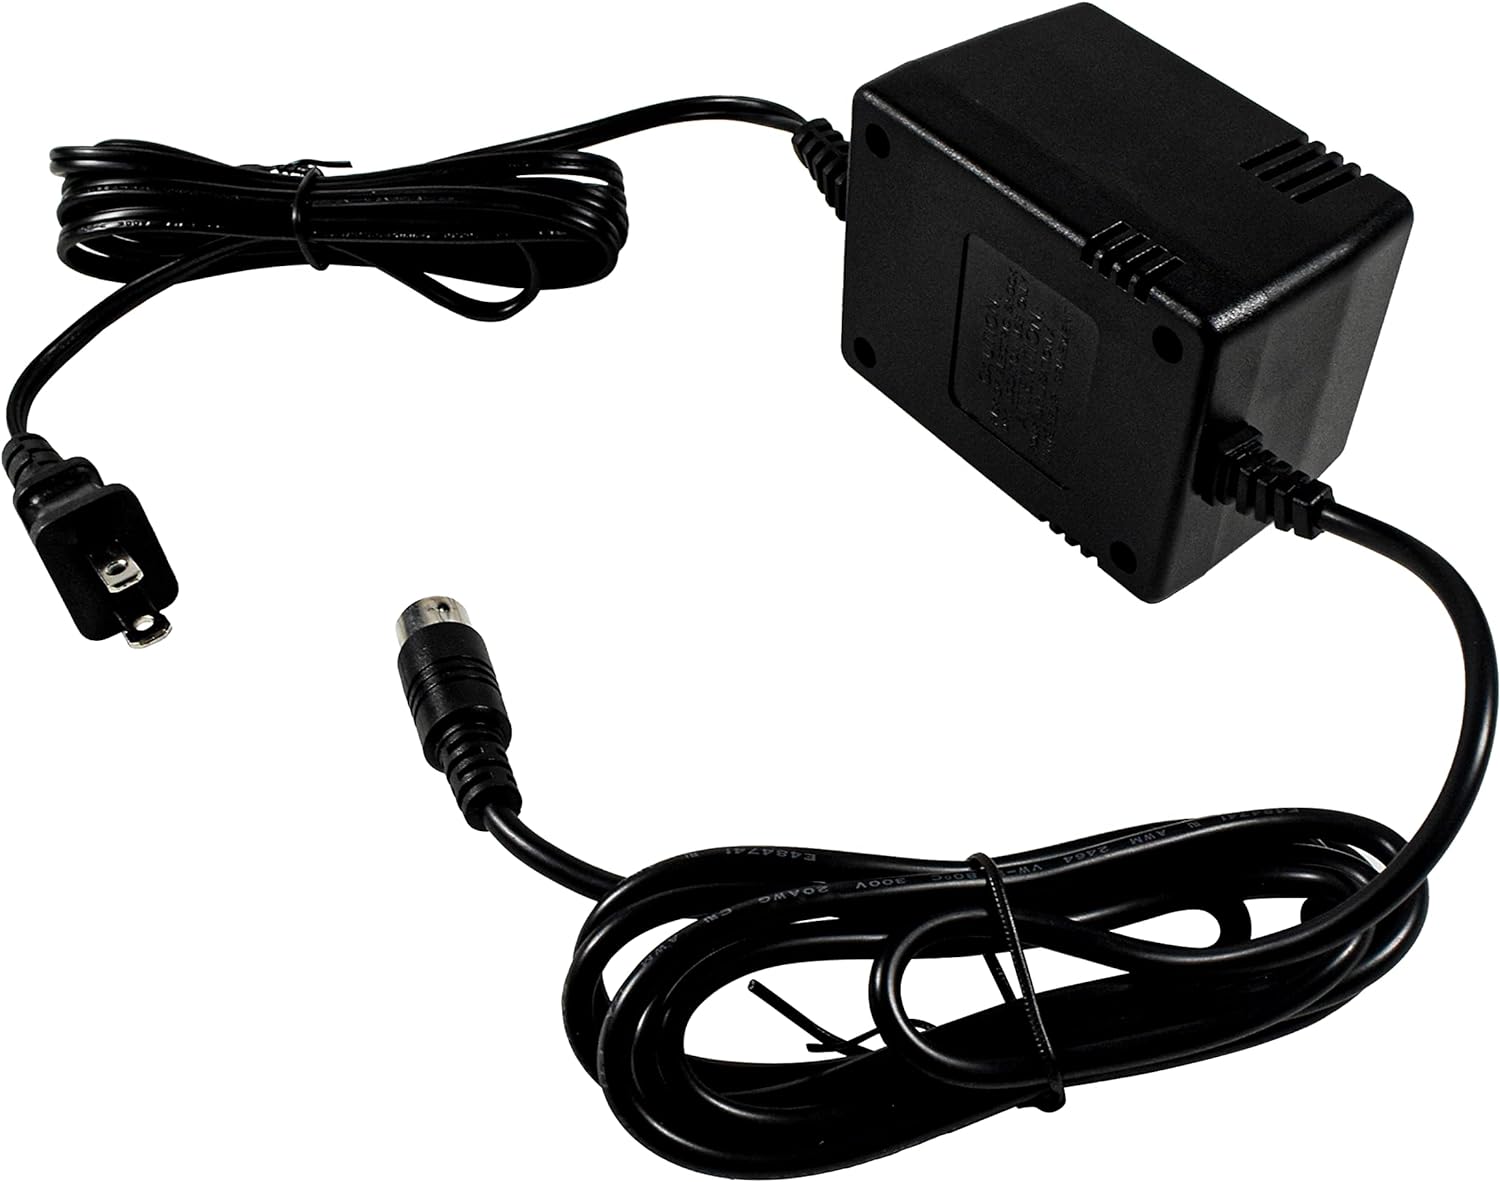 9V AC Adapter Compatible with Digitech PS0912 BP8 RP5 RP6 RP7 RP10 RP12 RP14D RP2000 RP20 RP21D, Studio Quad, Studio Qua - Click Image to Close